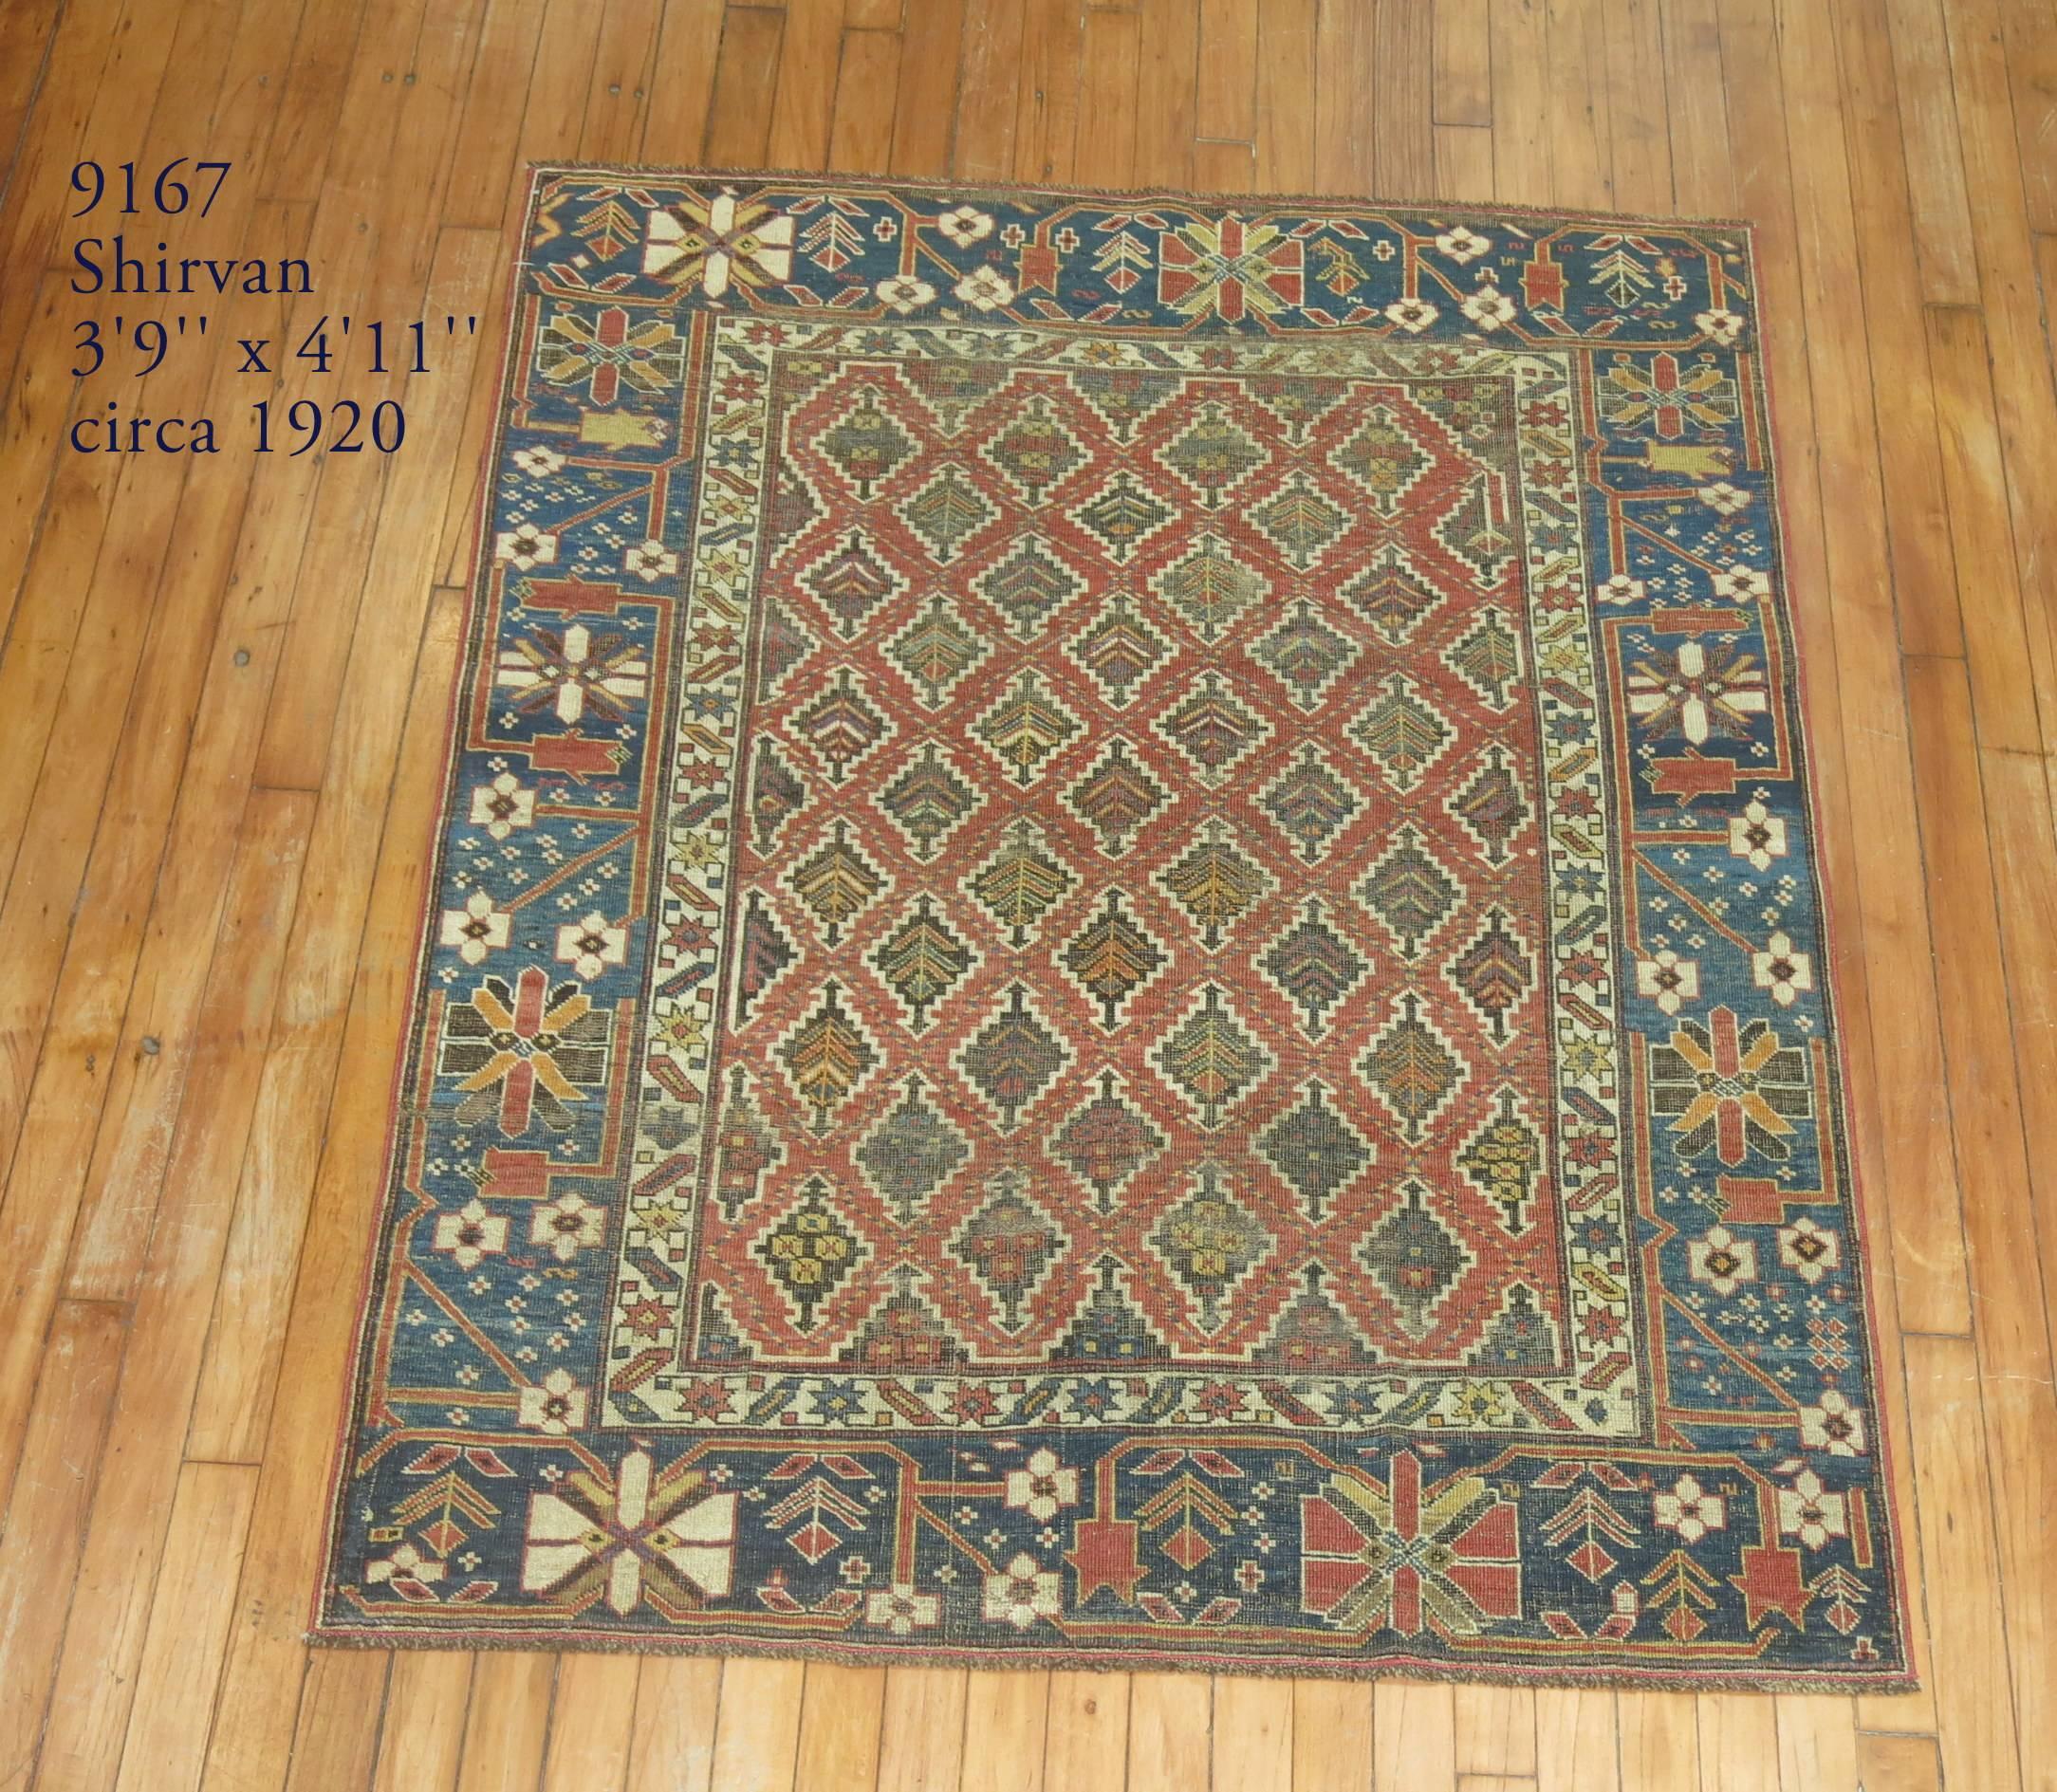 A late 19th century shabby chic Caucasian rug. Rustic colors throughout with a tribal vibe throughout the border and the field.

Size: 3'9” x 4'11”.